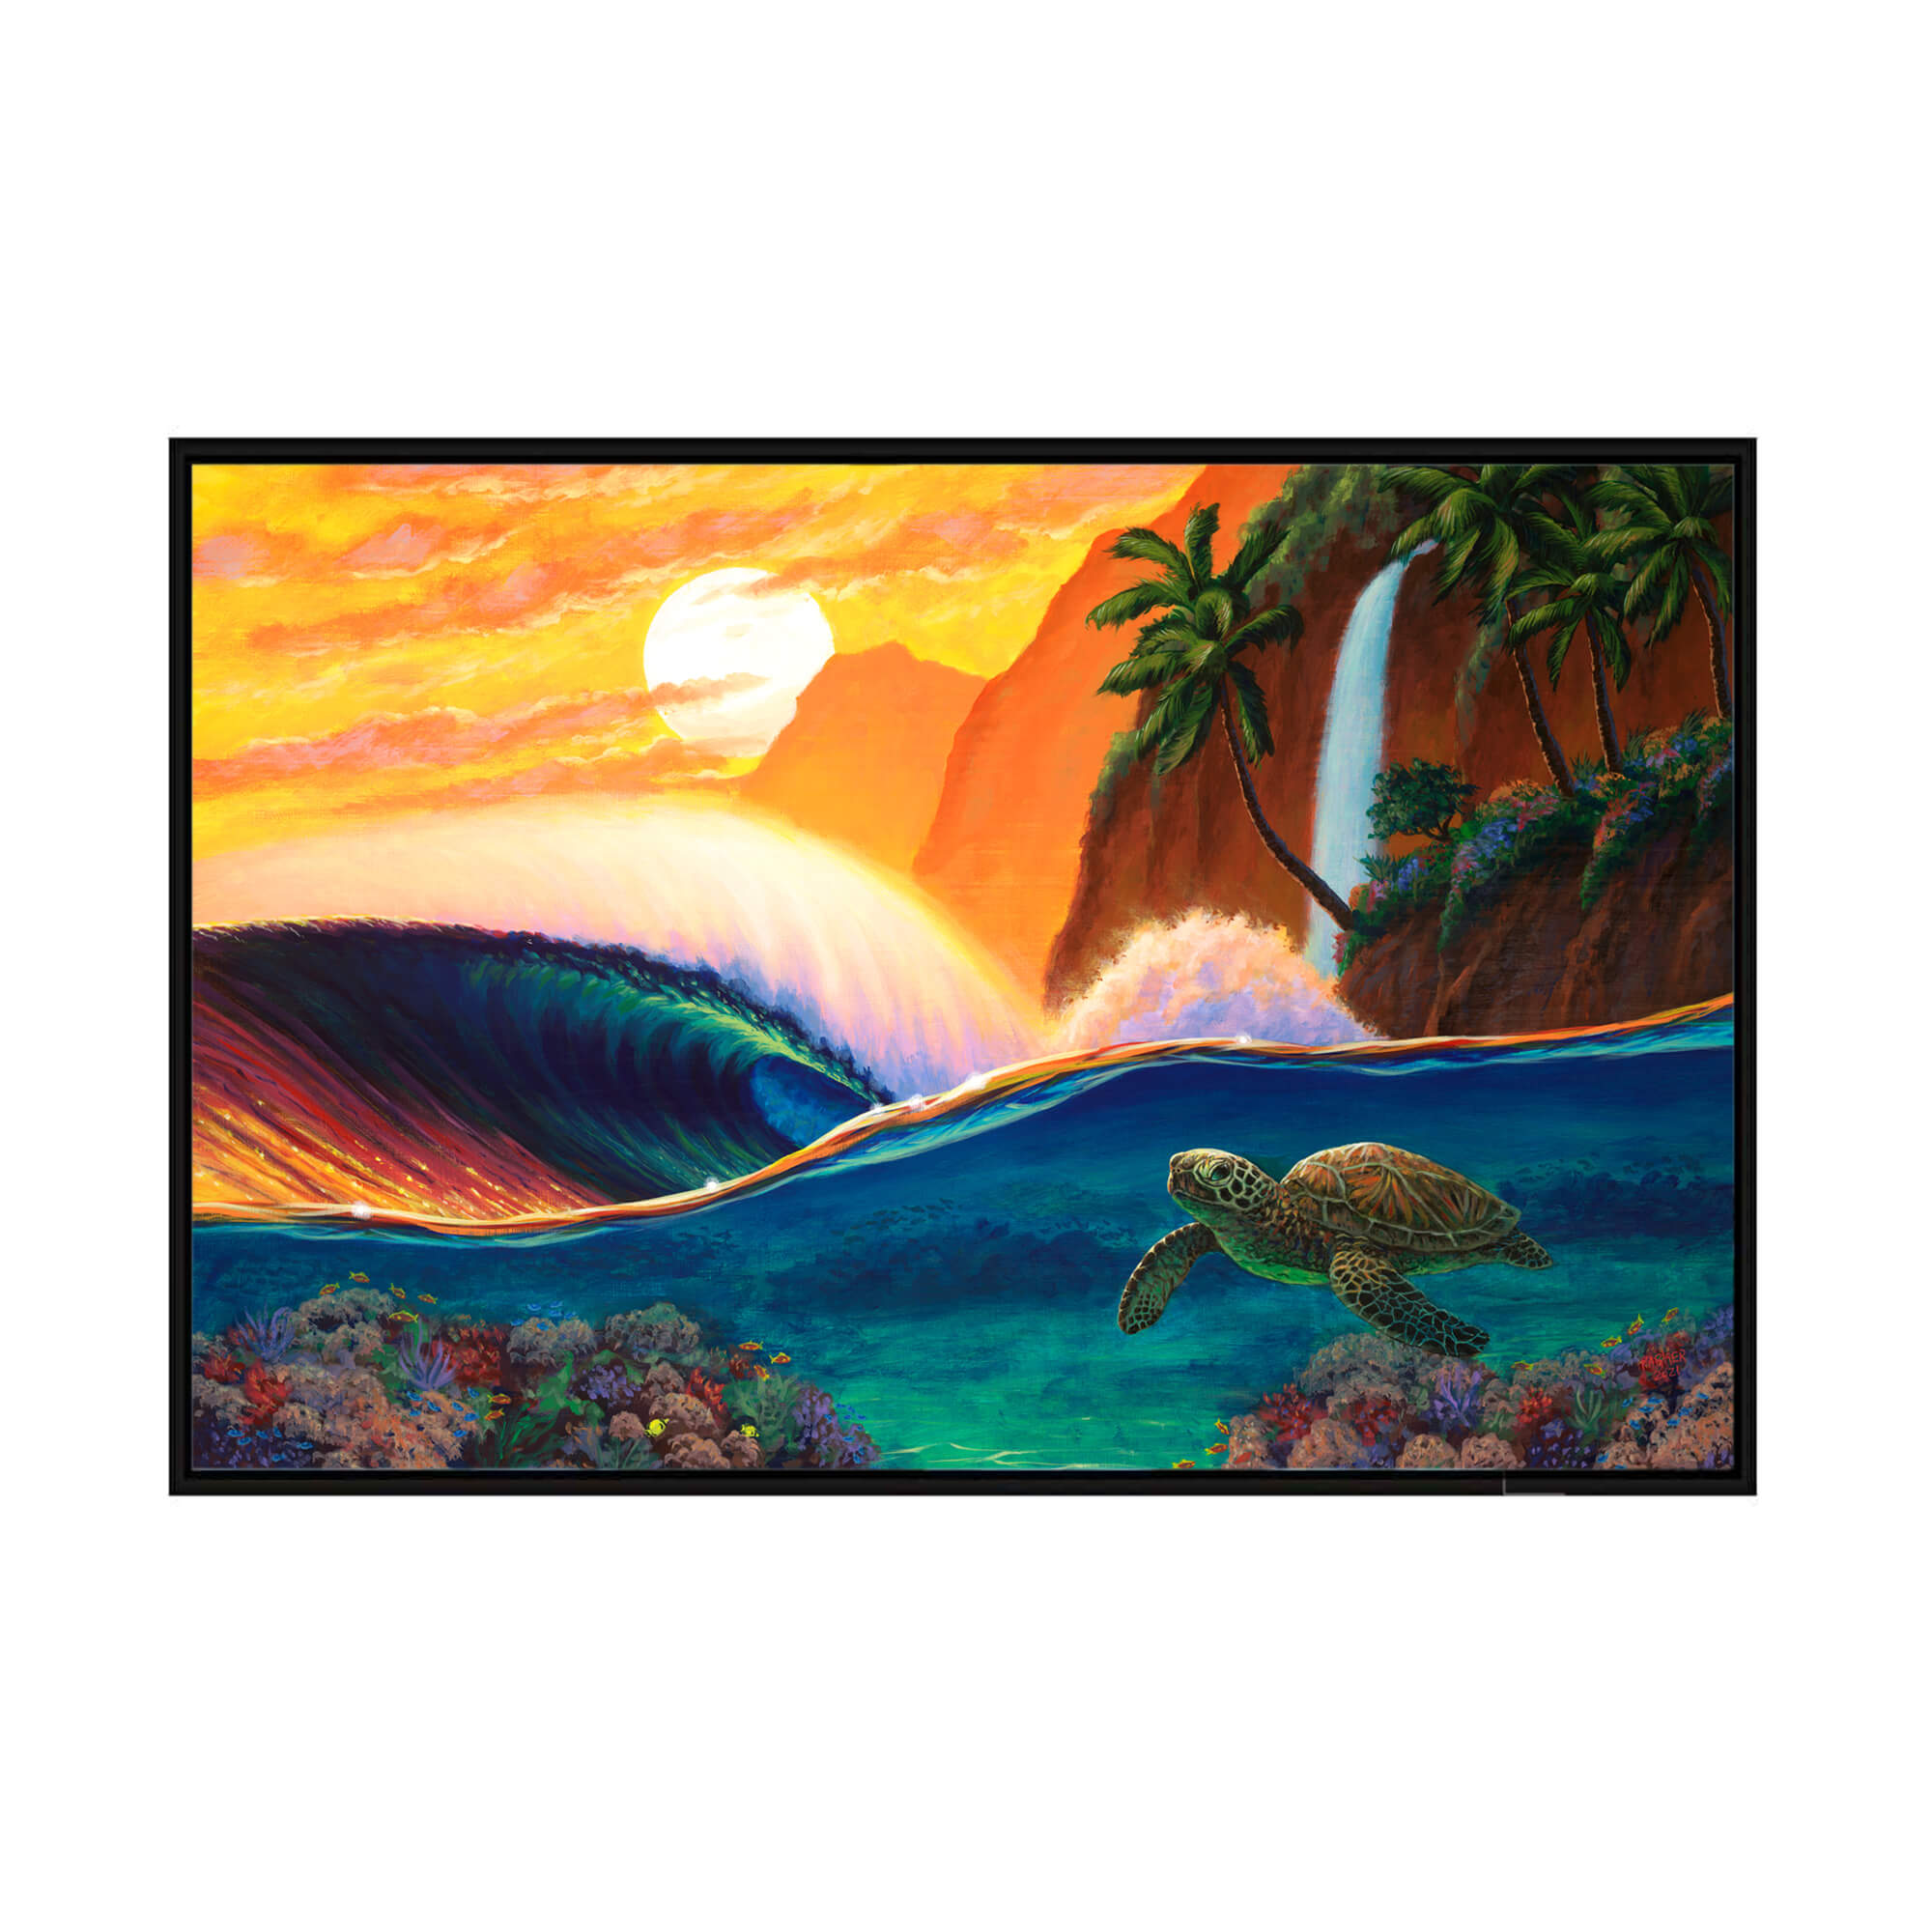 A framed canvas giclée art print featuring a sea turtle swimming and a vibrant sunset, crashing waves, and a mountain waterfall background by Hawaii artist Patrick Parker